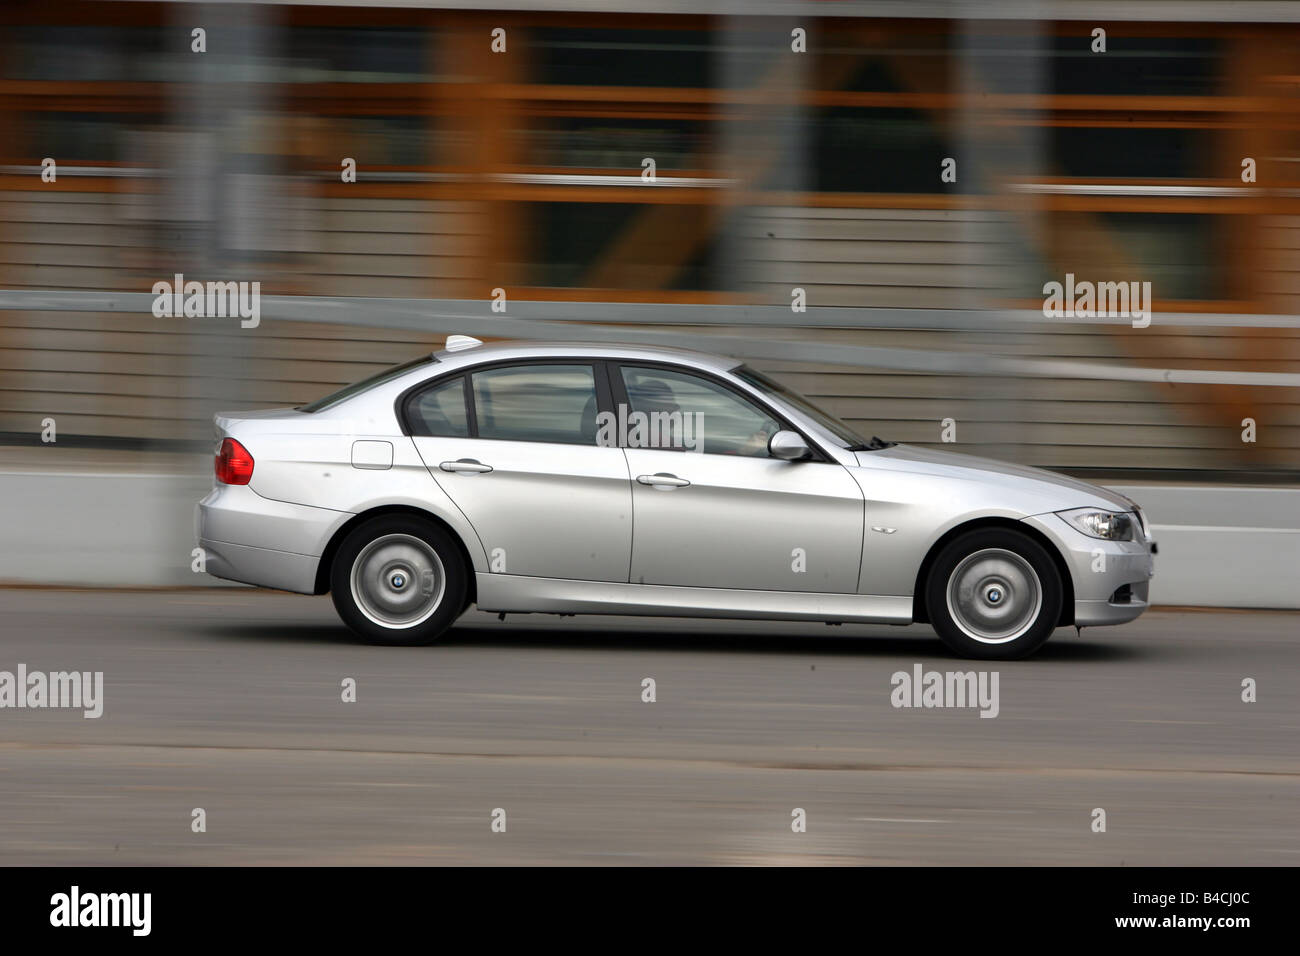 BMW 318d, model year 2004-, silver, driving, side view, City Stock Photo -  Alamy